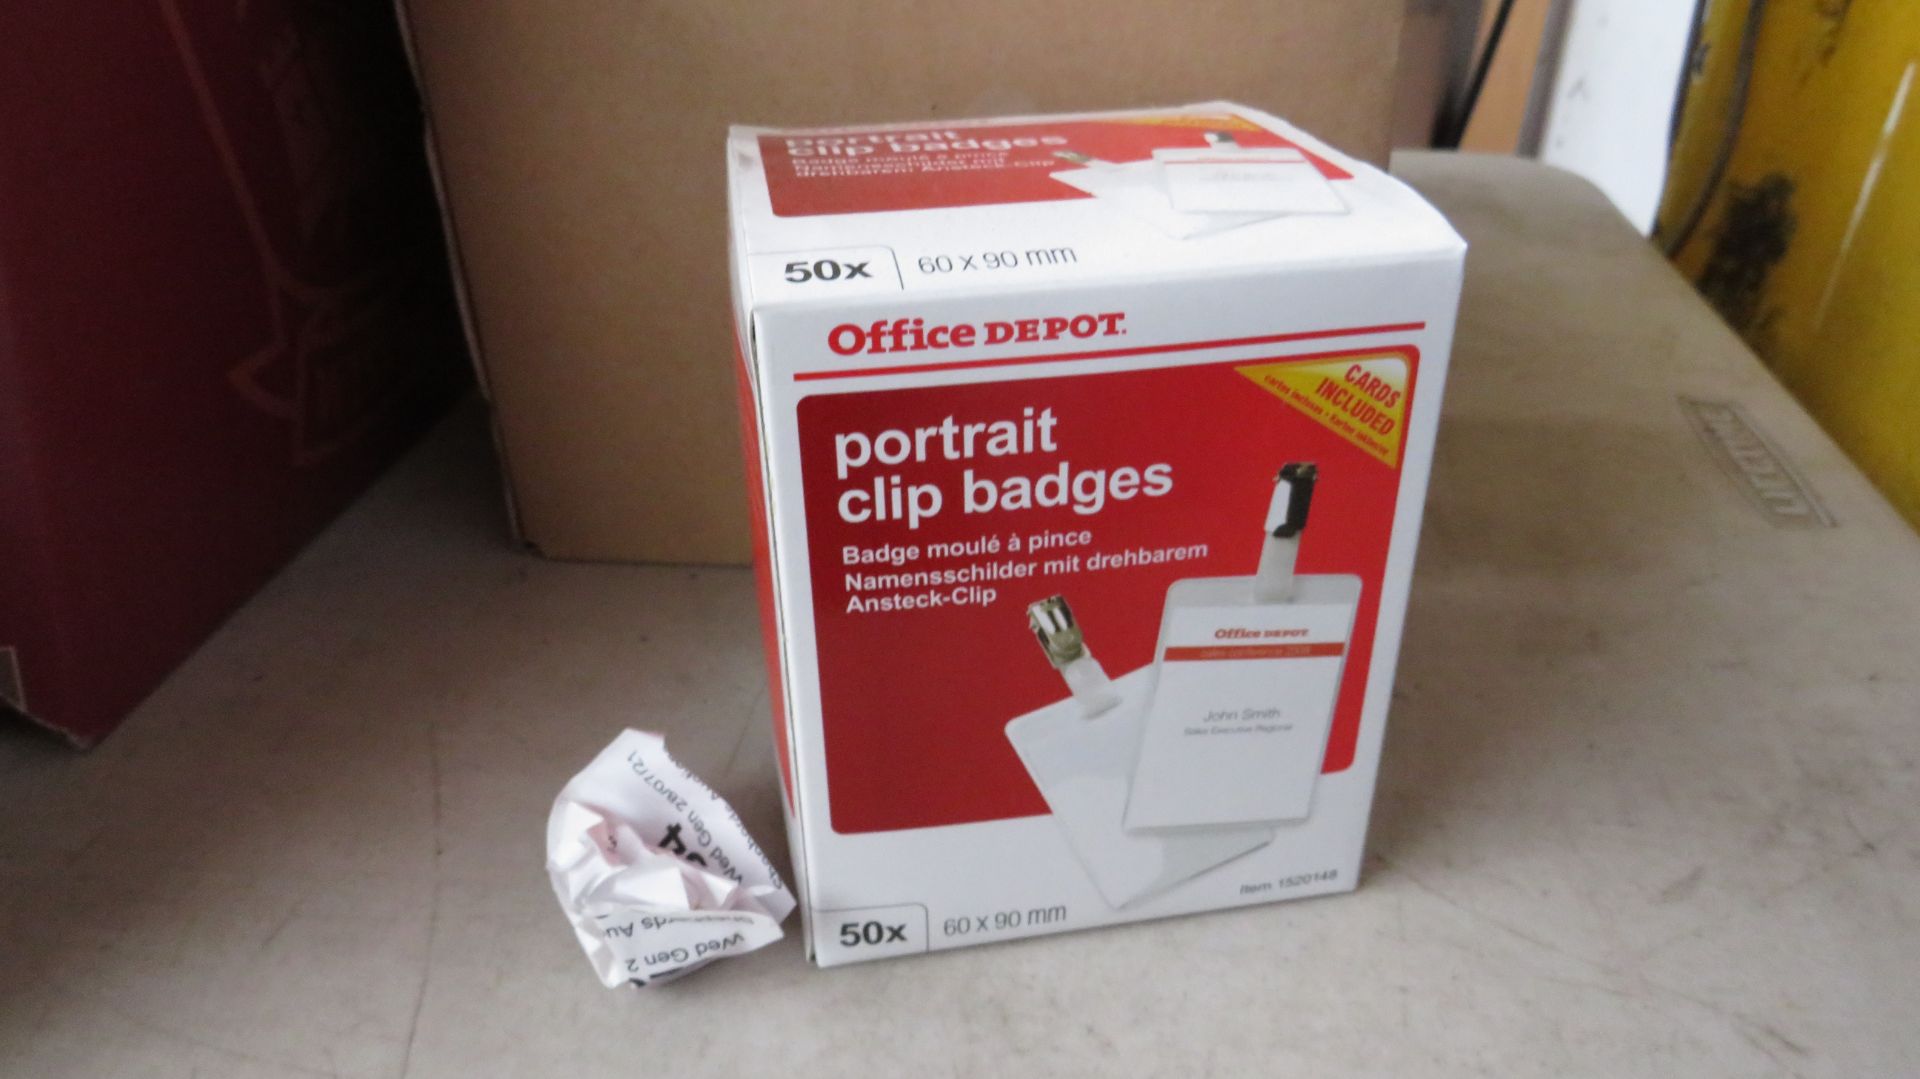 1X OFFICE DEPOT BOX OF 4 PORTRAIT CLIP BADGES, 60CM X 90 CM, UNCHECKED IN BOX